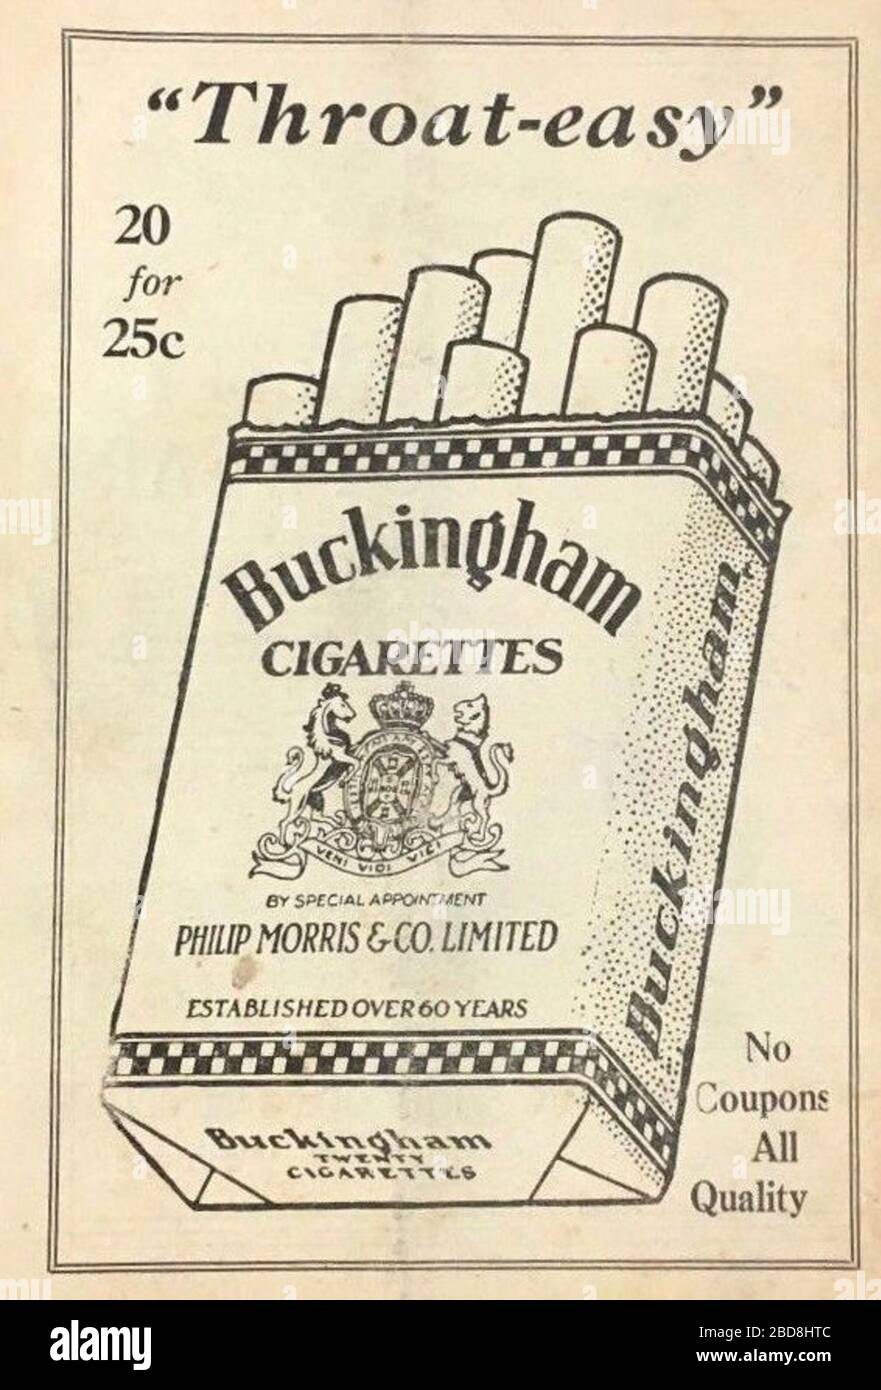 'Français : Publicité pour des cigarettes Buckingham dans un programme de catch en 1930; 1930; https://www.ebay.ca/itm/1930-Arena-Gardens-Wrestling-Program-Sports-Dynamite-Gus-Sonnenburg-Vintage-Rare/332299318125?hash=item4d5e95336d:g:xsoAAOSwgu9ZY49o; Public domainPublic domainfalsefalse      This Canadian work is in the public domain in Canada because its copyright has expired due to one of the following: 1. it was subject to Crown copyright and was first published more than 50 years ago, or it was not subject to Crown copyright, and  2. it is a photograph that was created prior to January 1 Stock Photo